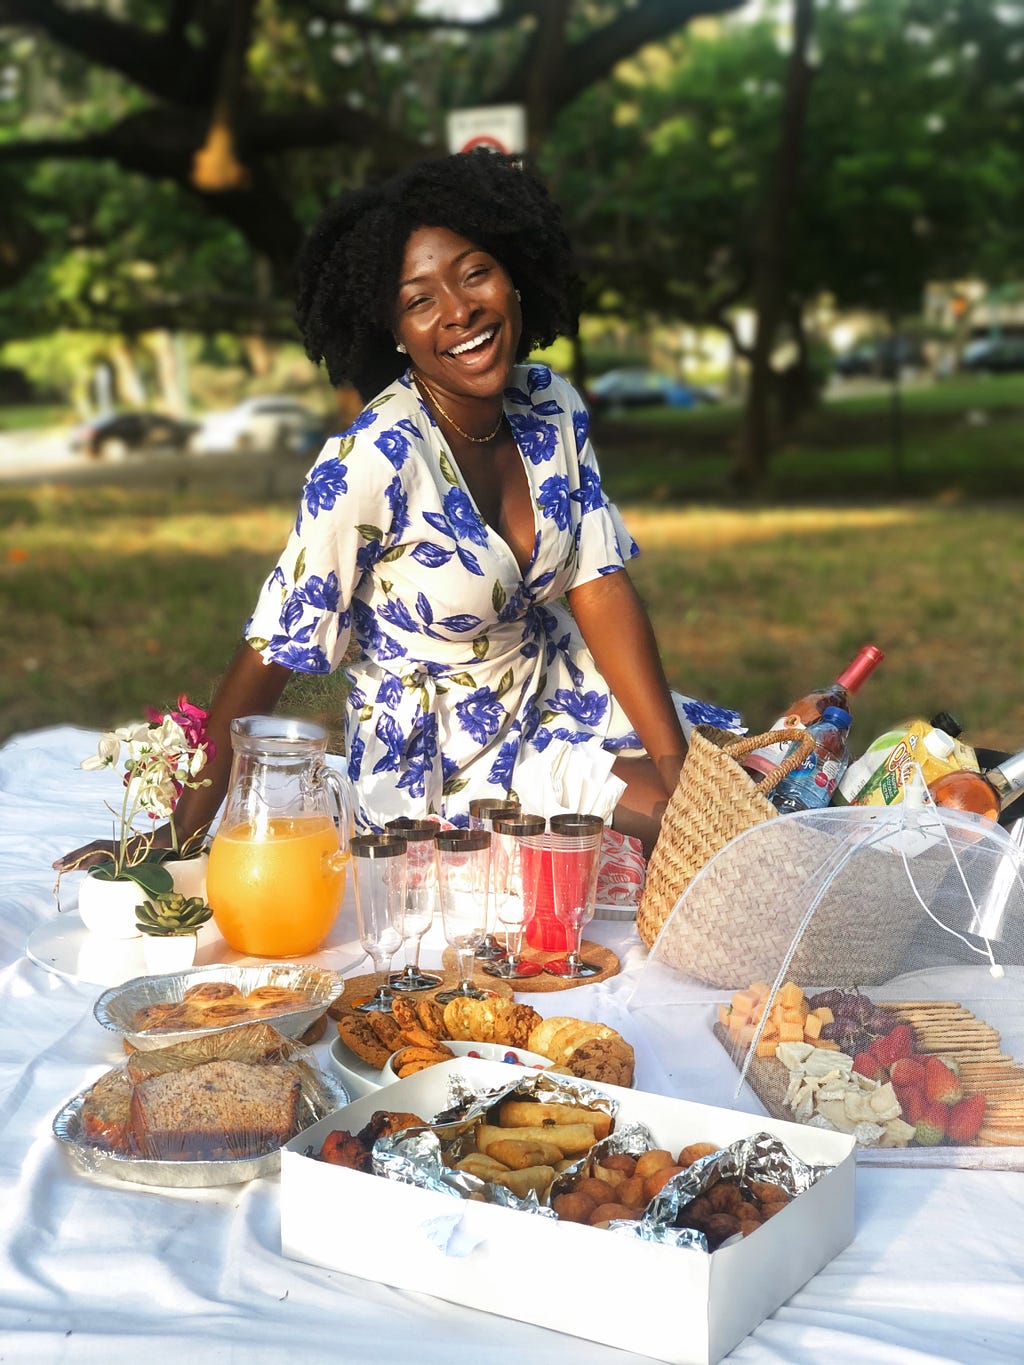 Black girl (author) smiling in front of picnic setup